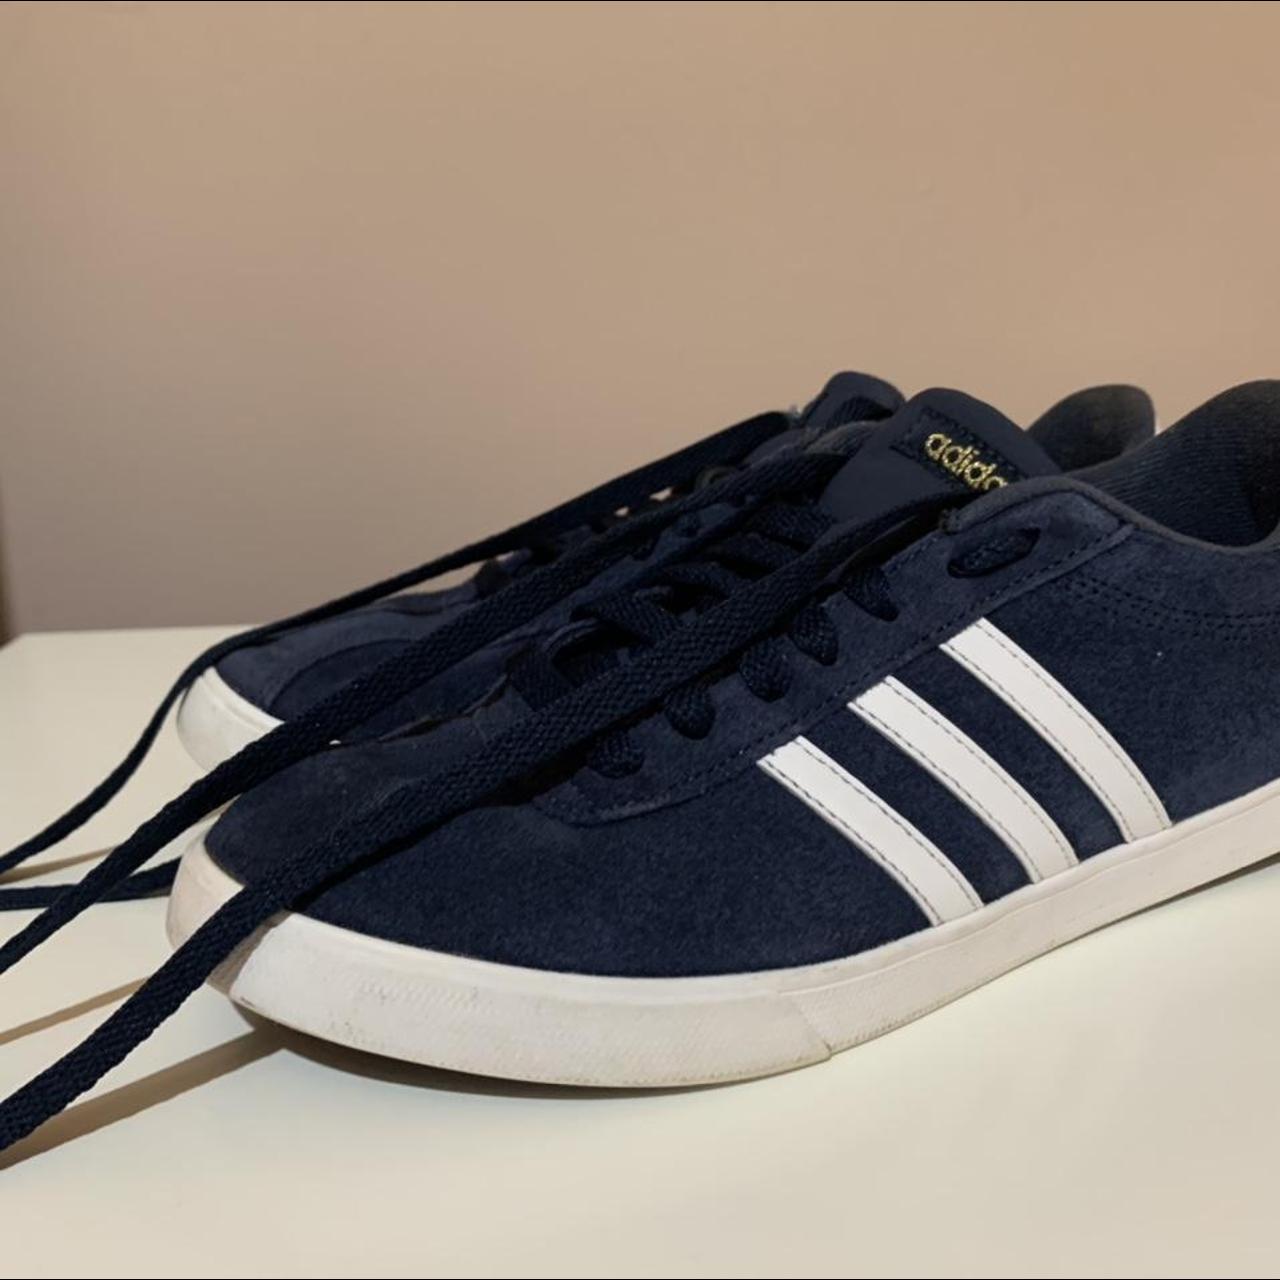 Navy adidas trainers. Wear and tear shown. Can be... - Depop